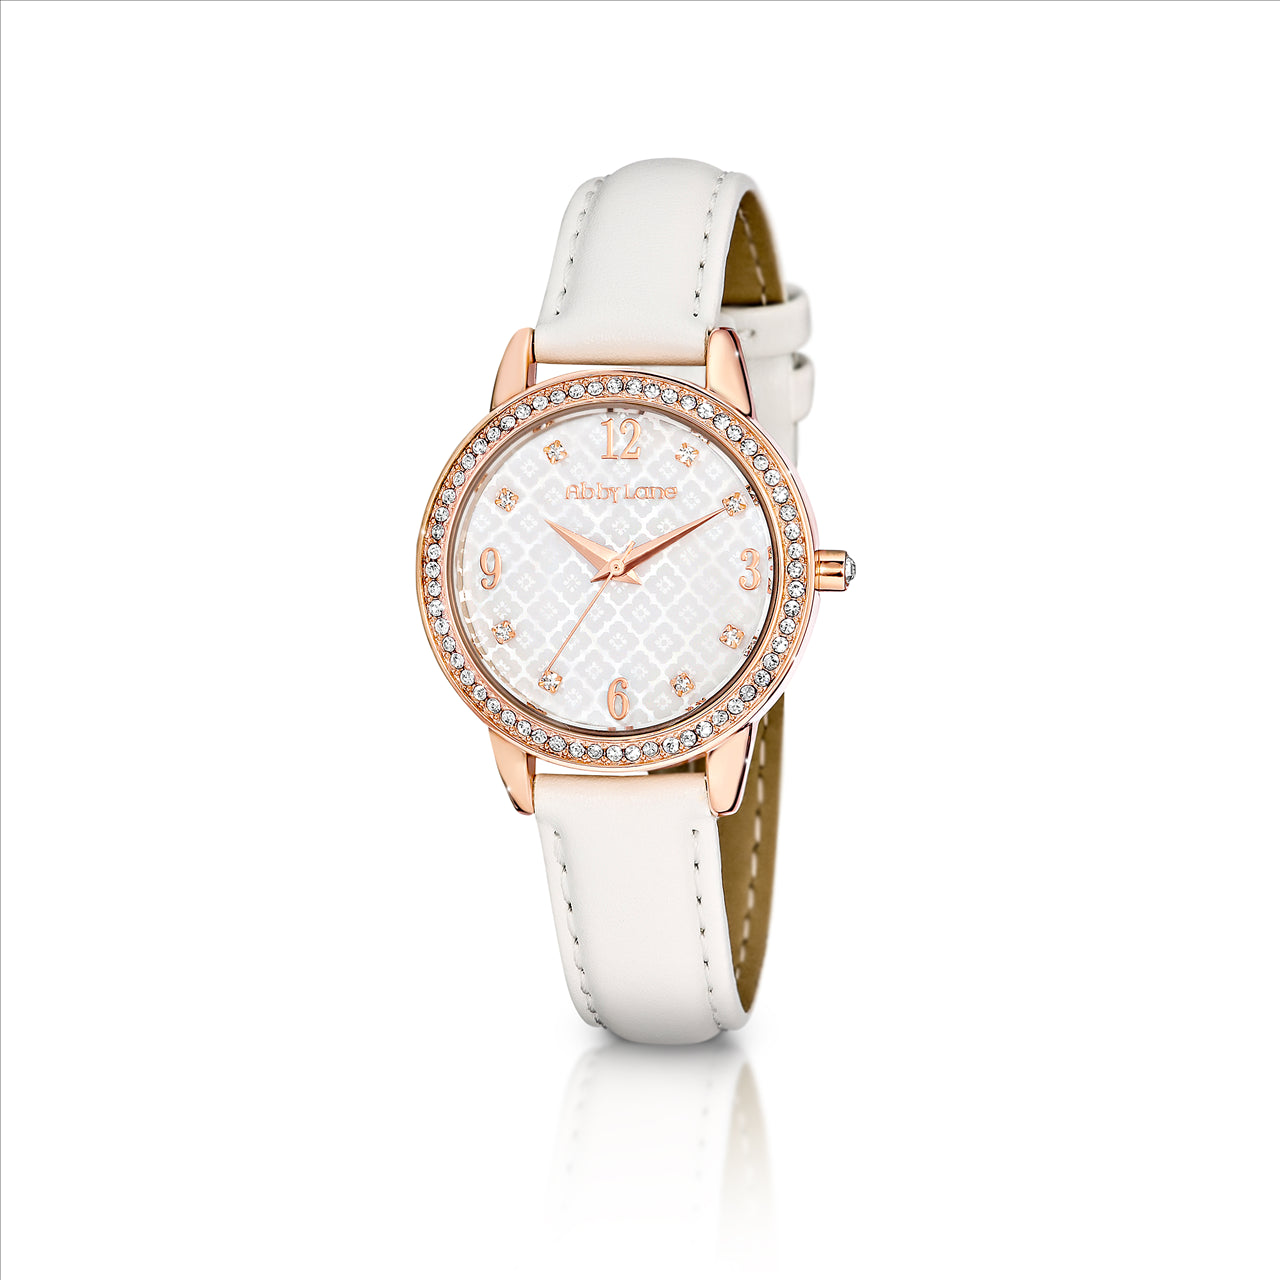 Abby lane elizabeth rosetone case. white etched dial with crystals. white leather strap-- case size 31mm